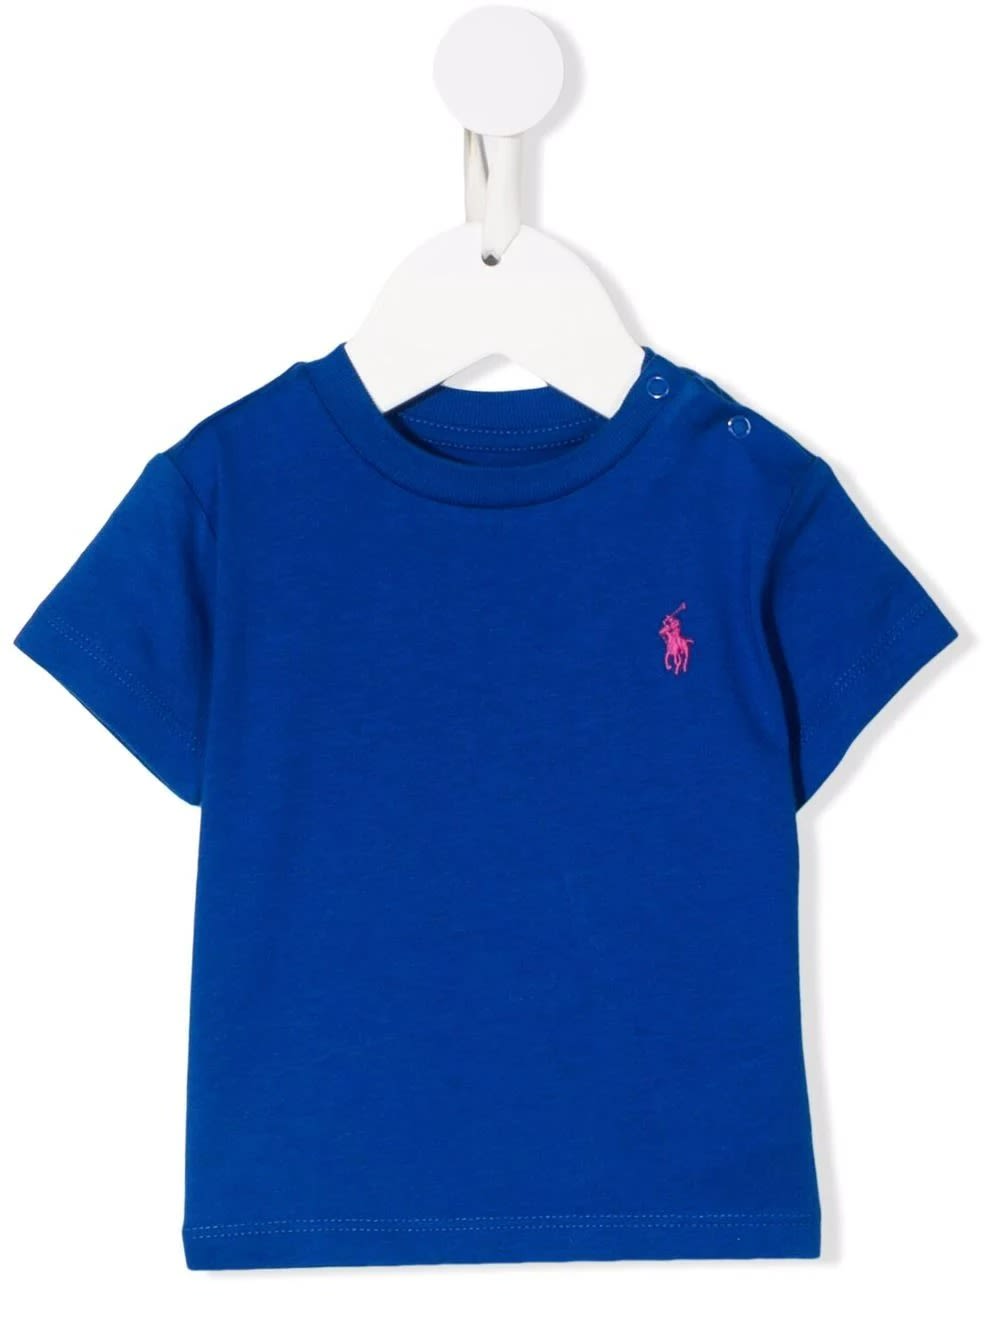 Ralph Lauren Baby Royal Blue T-shirt With Pink Pony